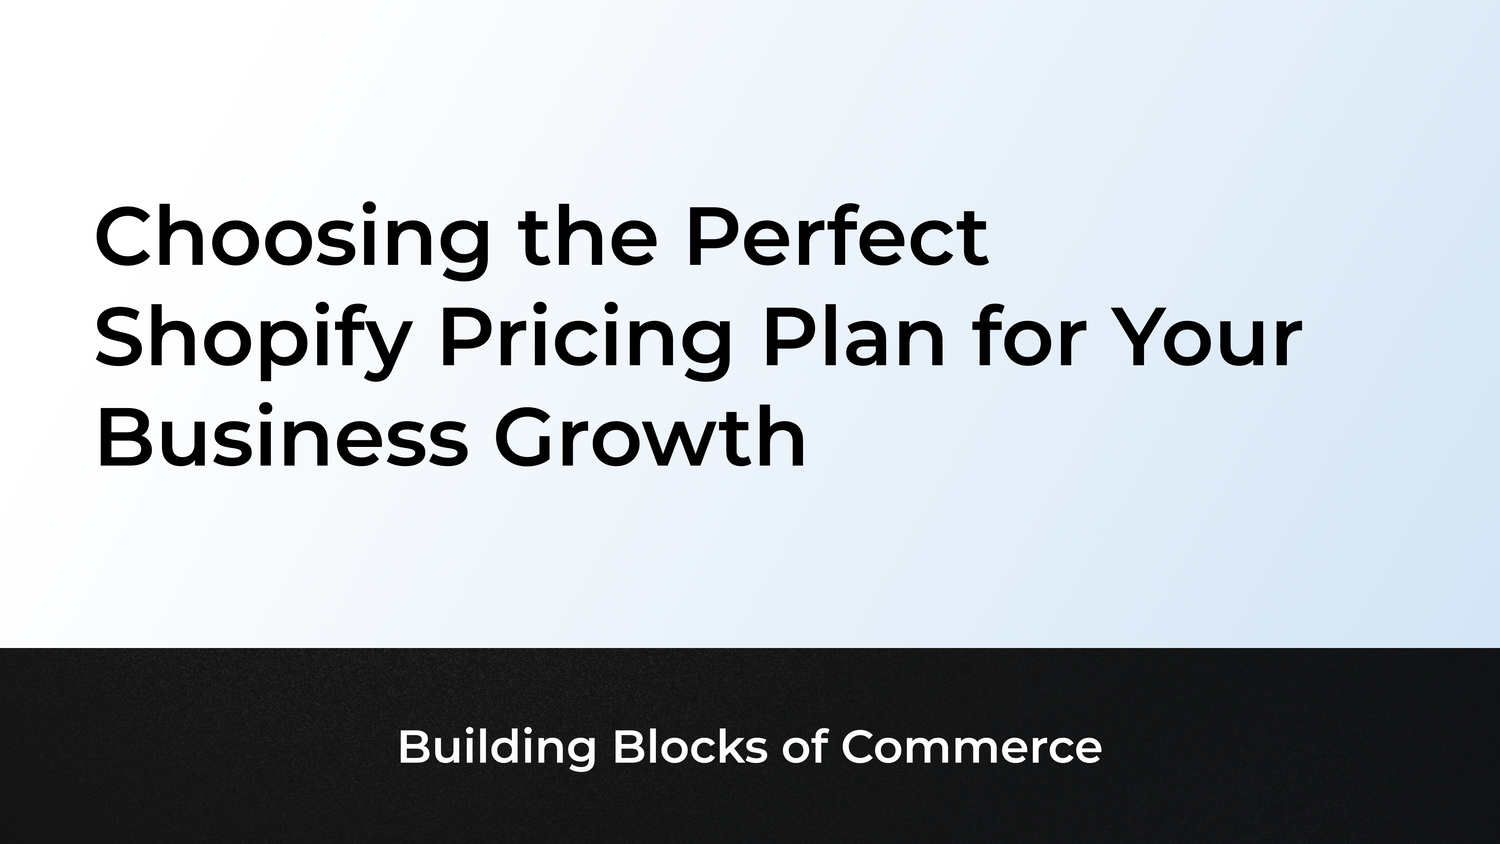 Choosing the Perfect Shopify Pricing Plan for Your Business Growth